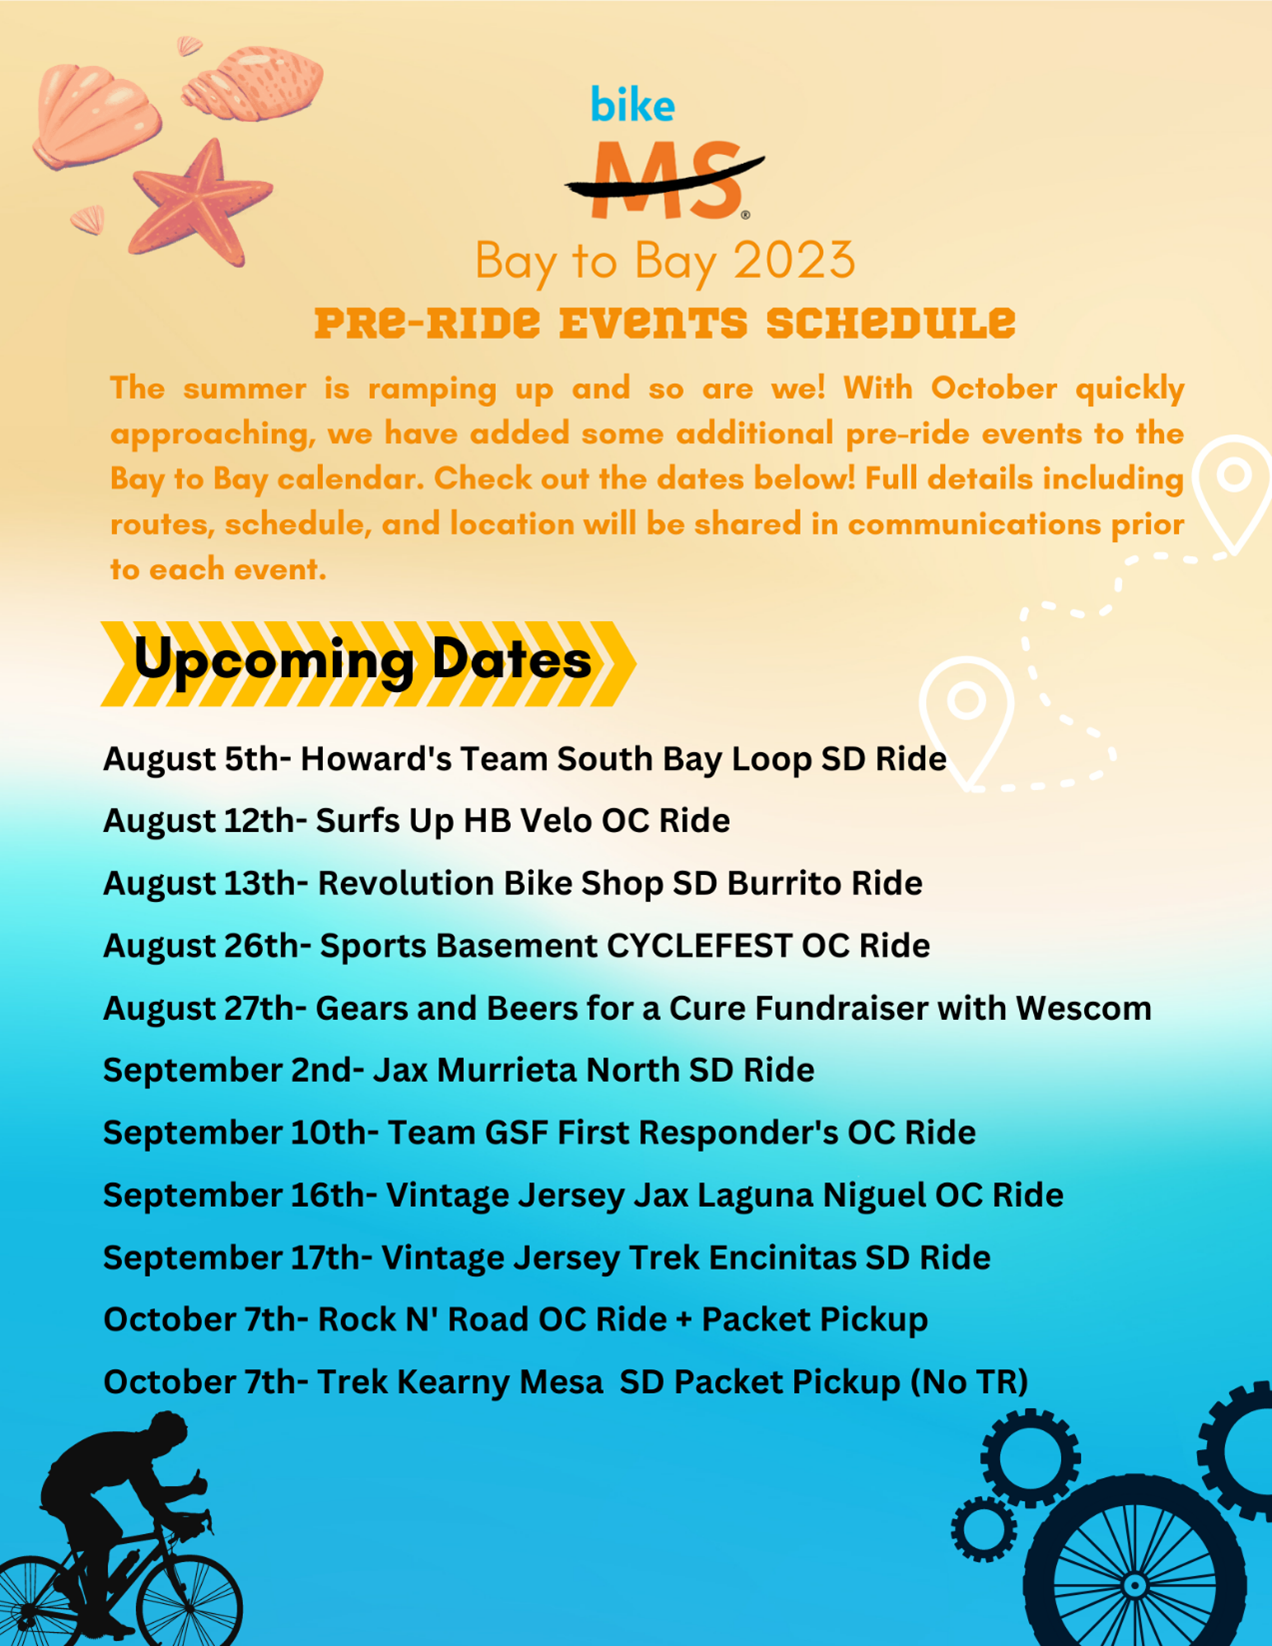 Bike MS: Bay to Bay 2023 Pre ride events schedule